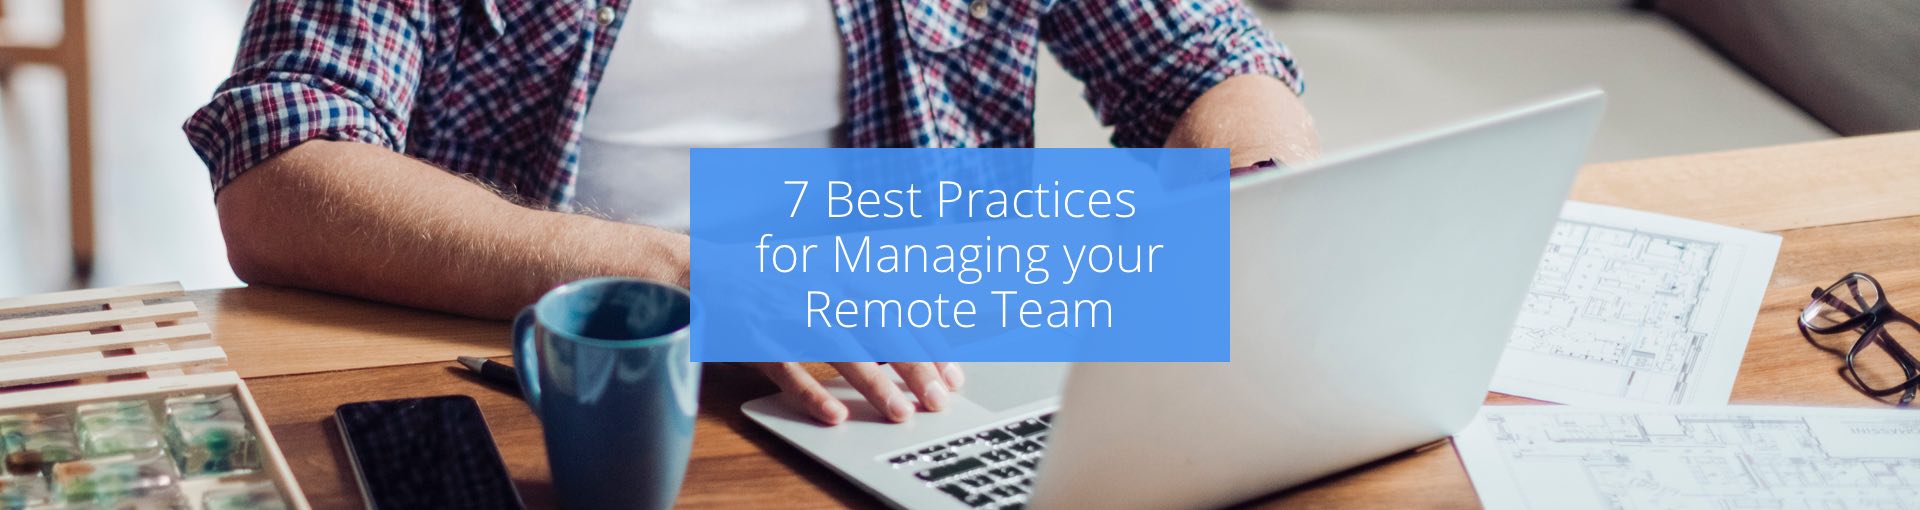 7 Best Practices for Managing Your Remote Team